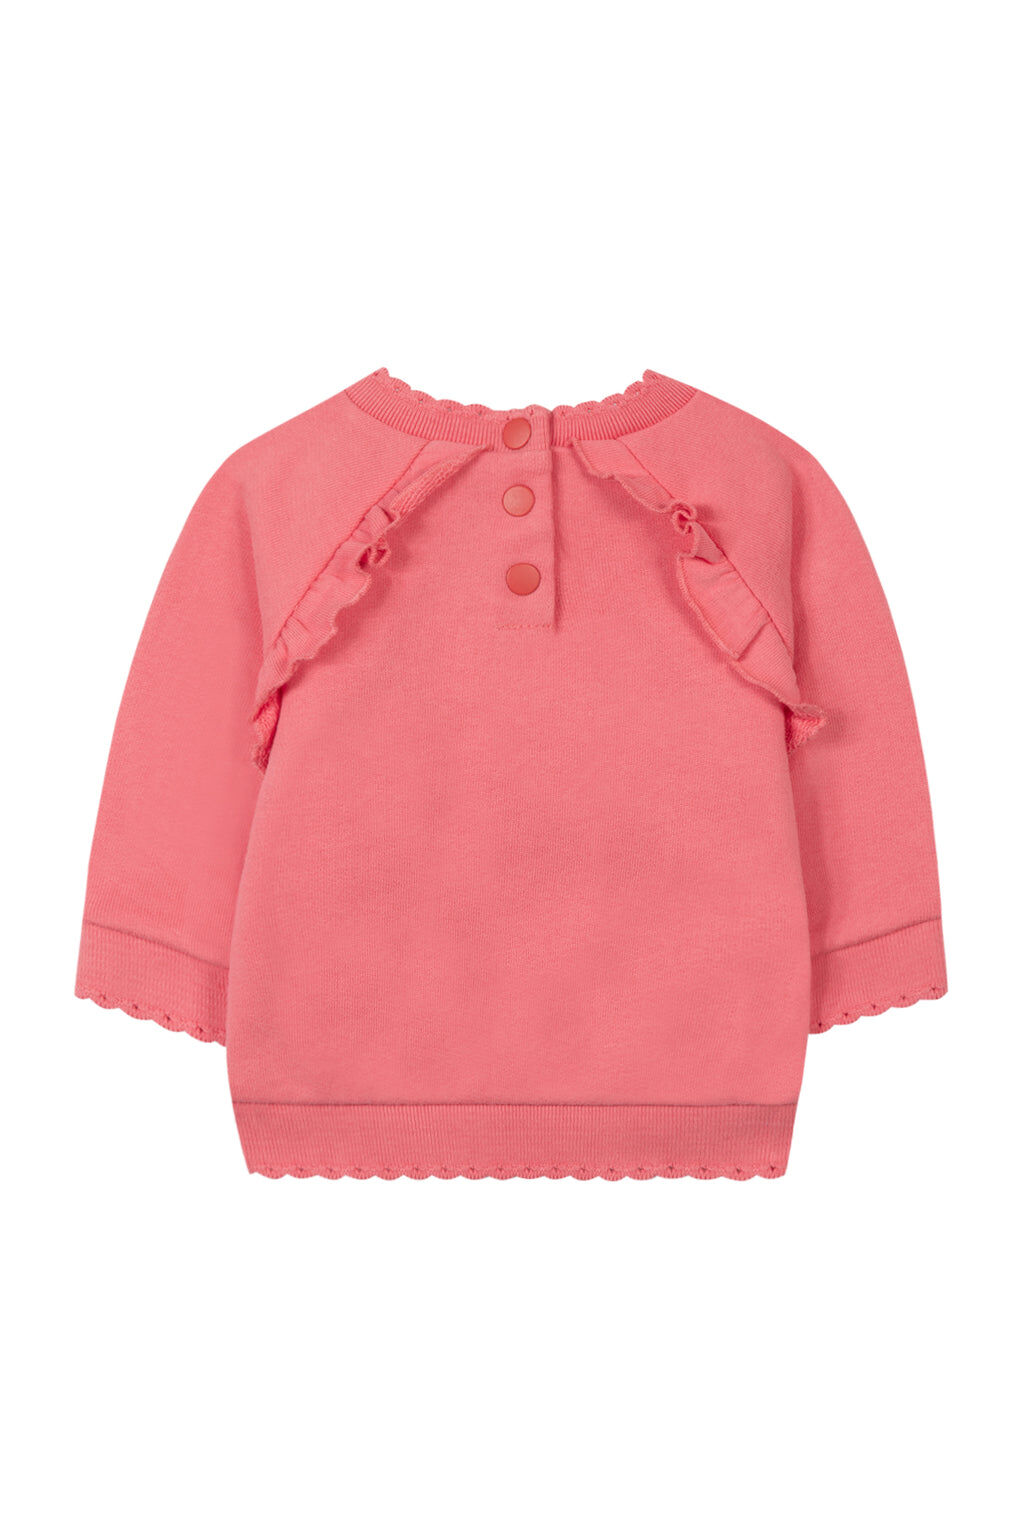 Sweater - Pink Embrodery rainbow